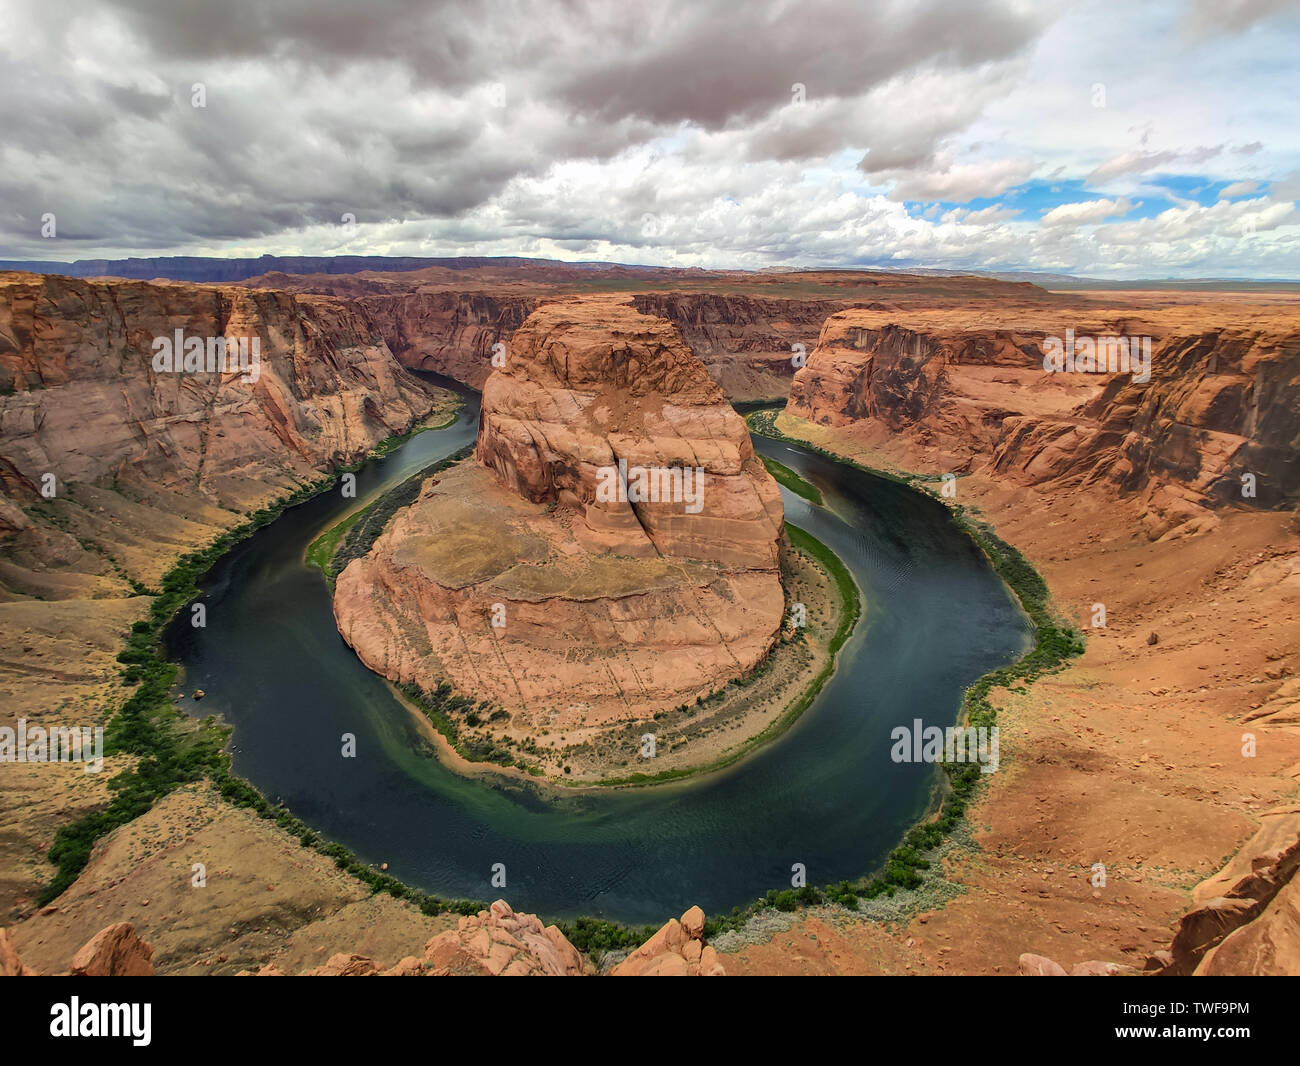 Horseshoe bend, Arizona, United States. Horseshoe-shaped incised meander of the Colorado River near the town of Page, clody sky background Stock Photo